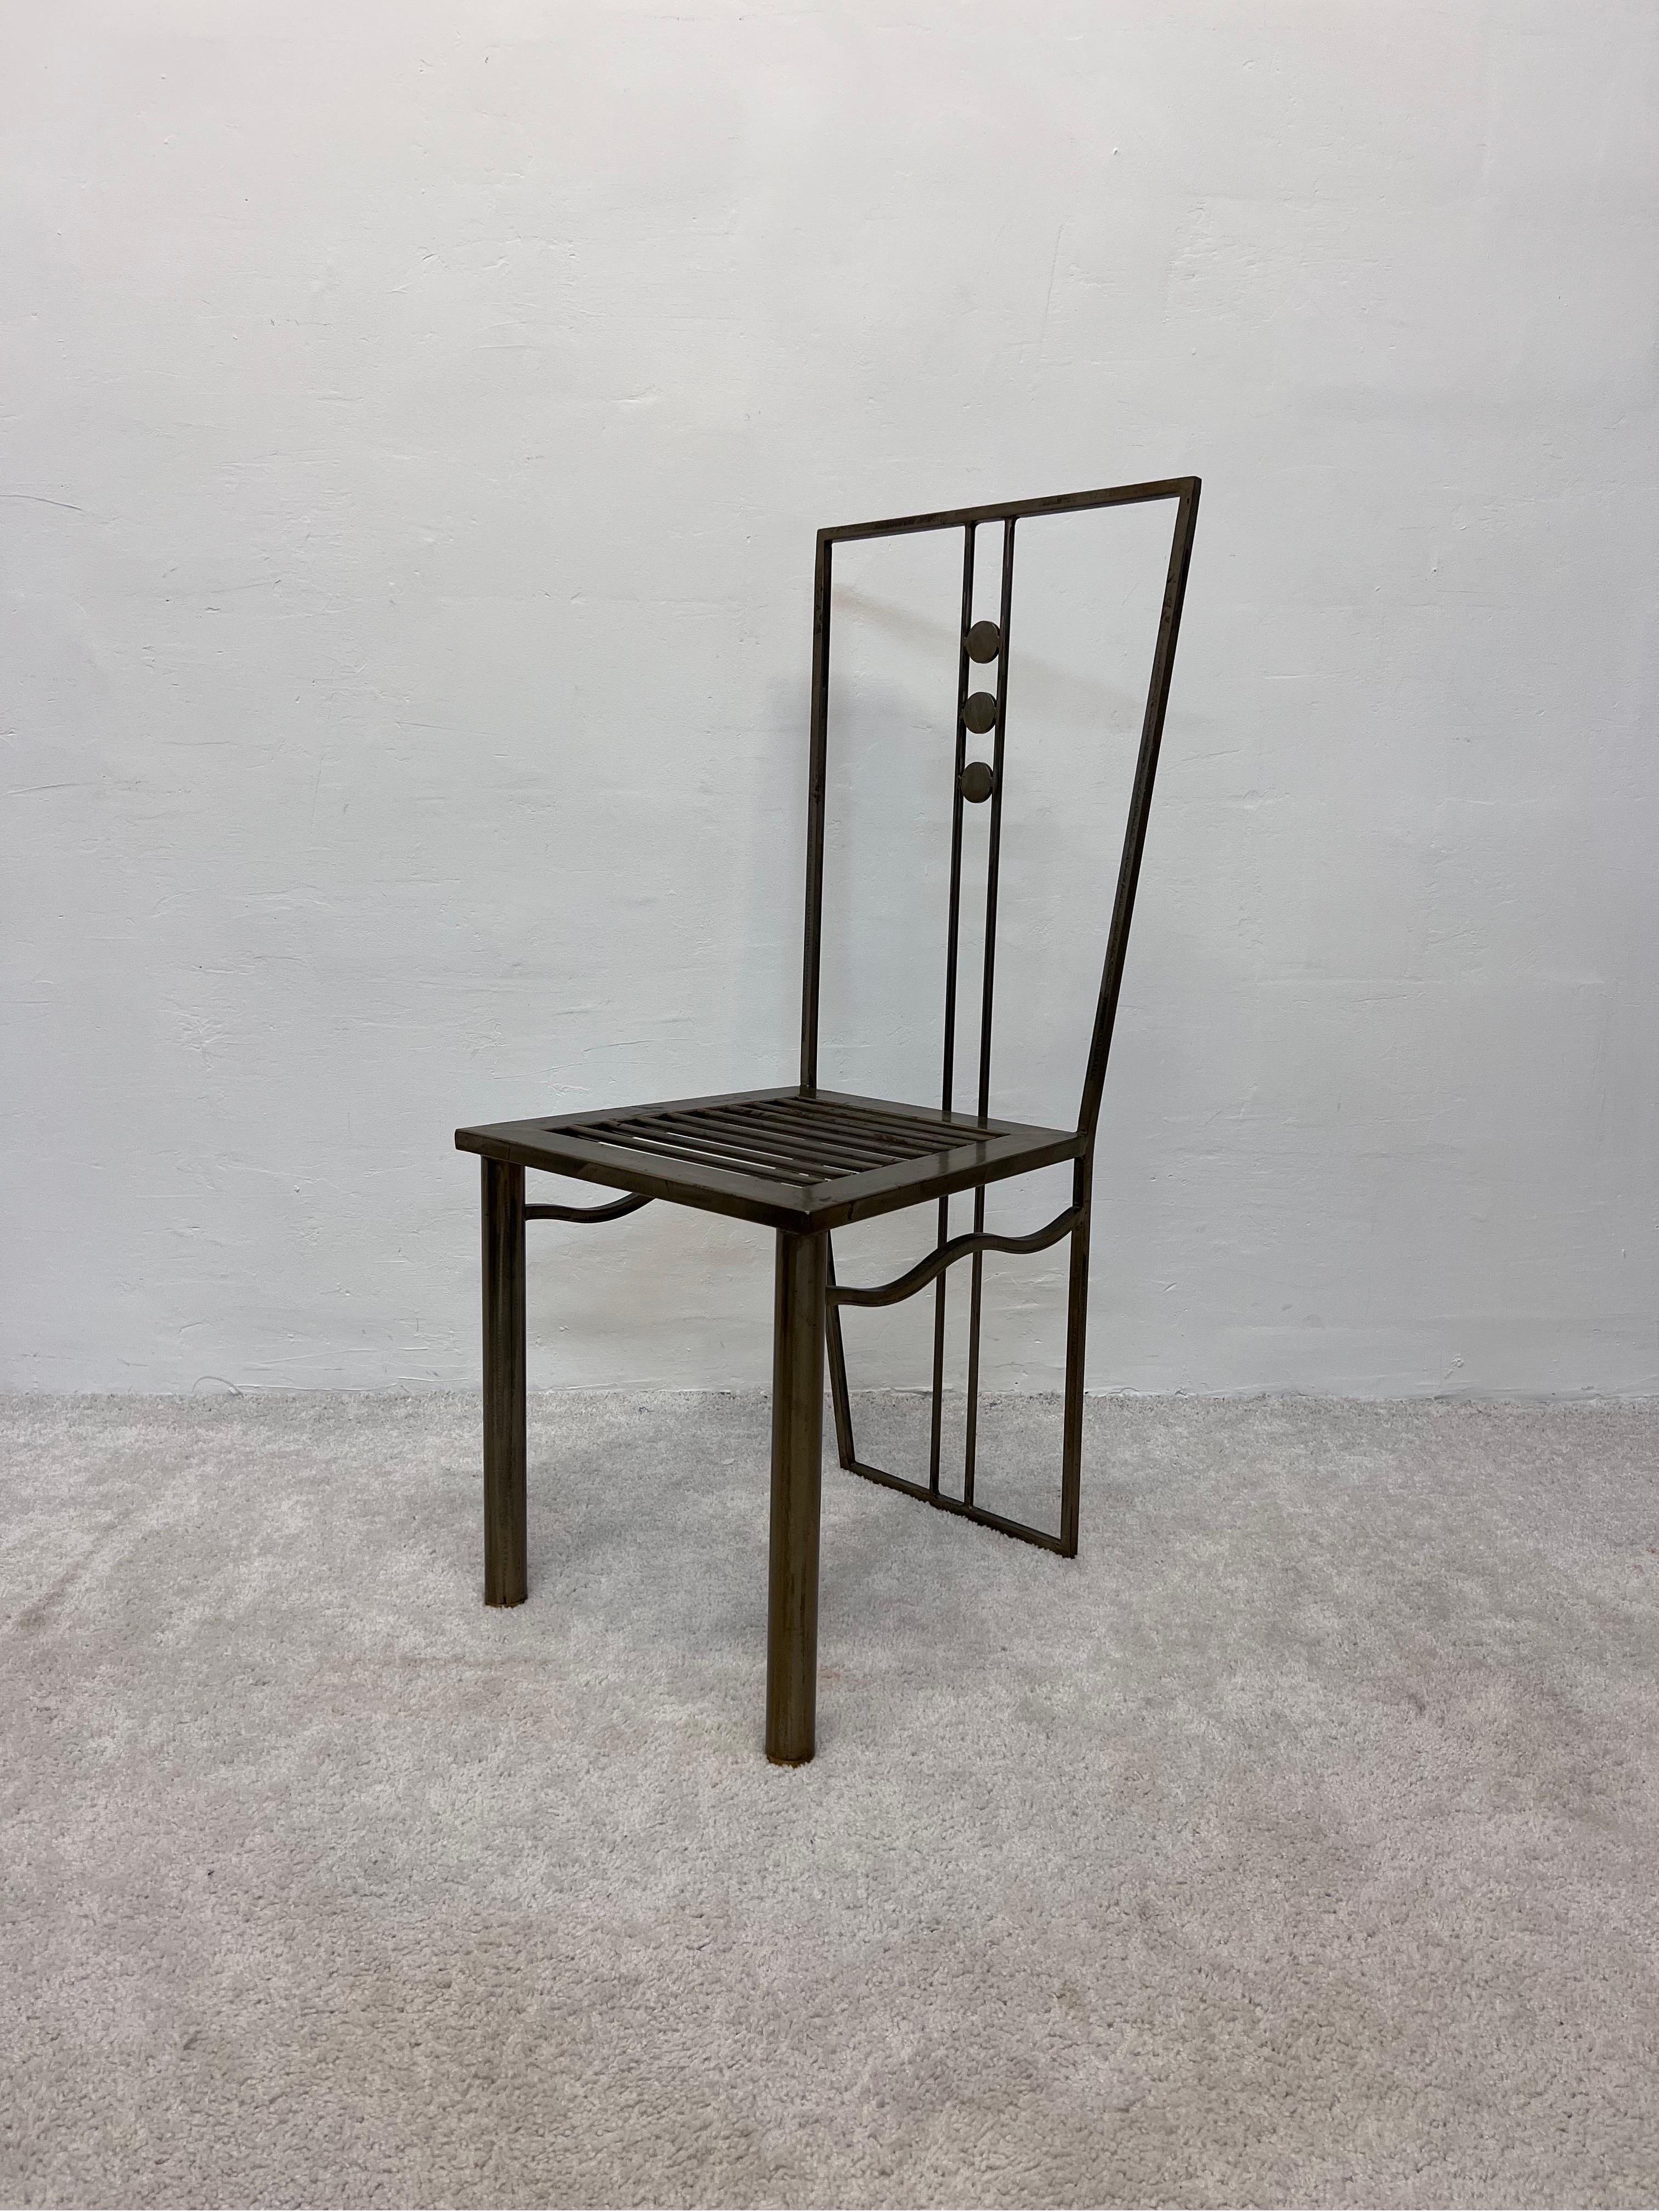 Postmodern Sculptural Studio Crafted Steel Dining or Side Chair, 1990s For Sale 1